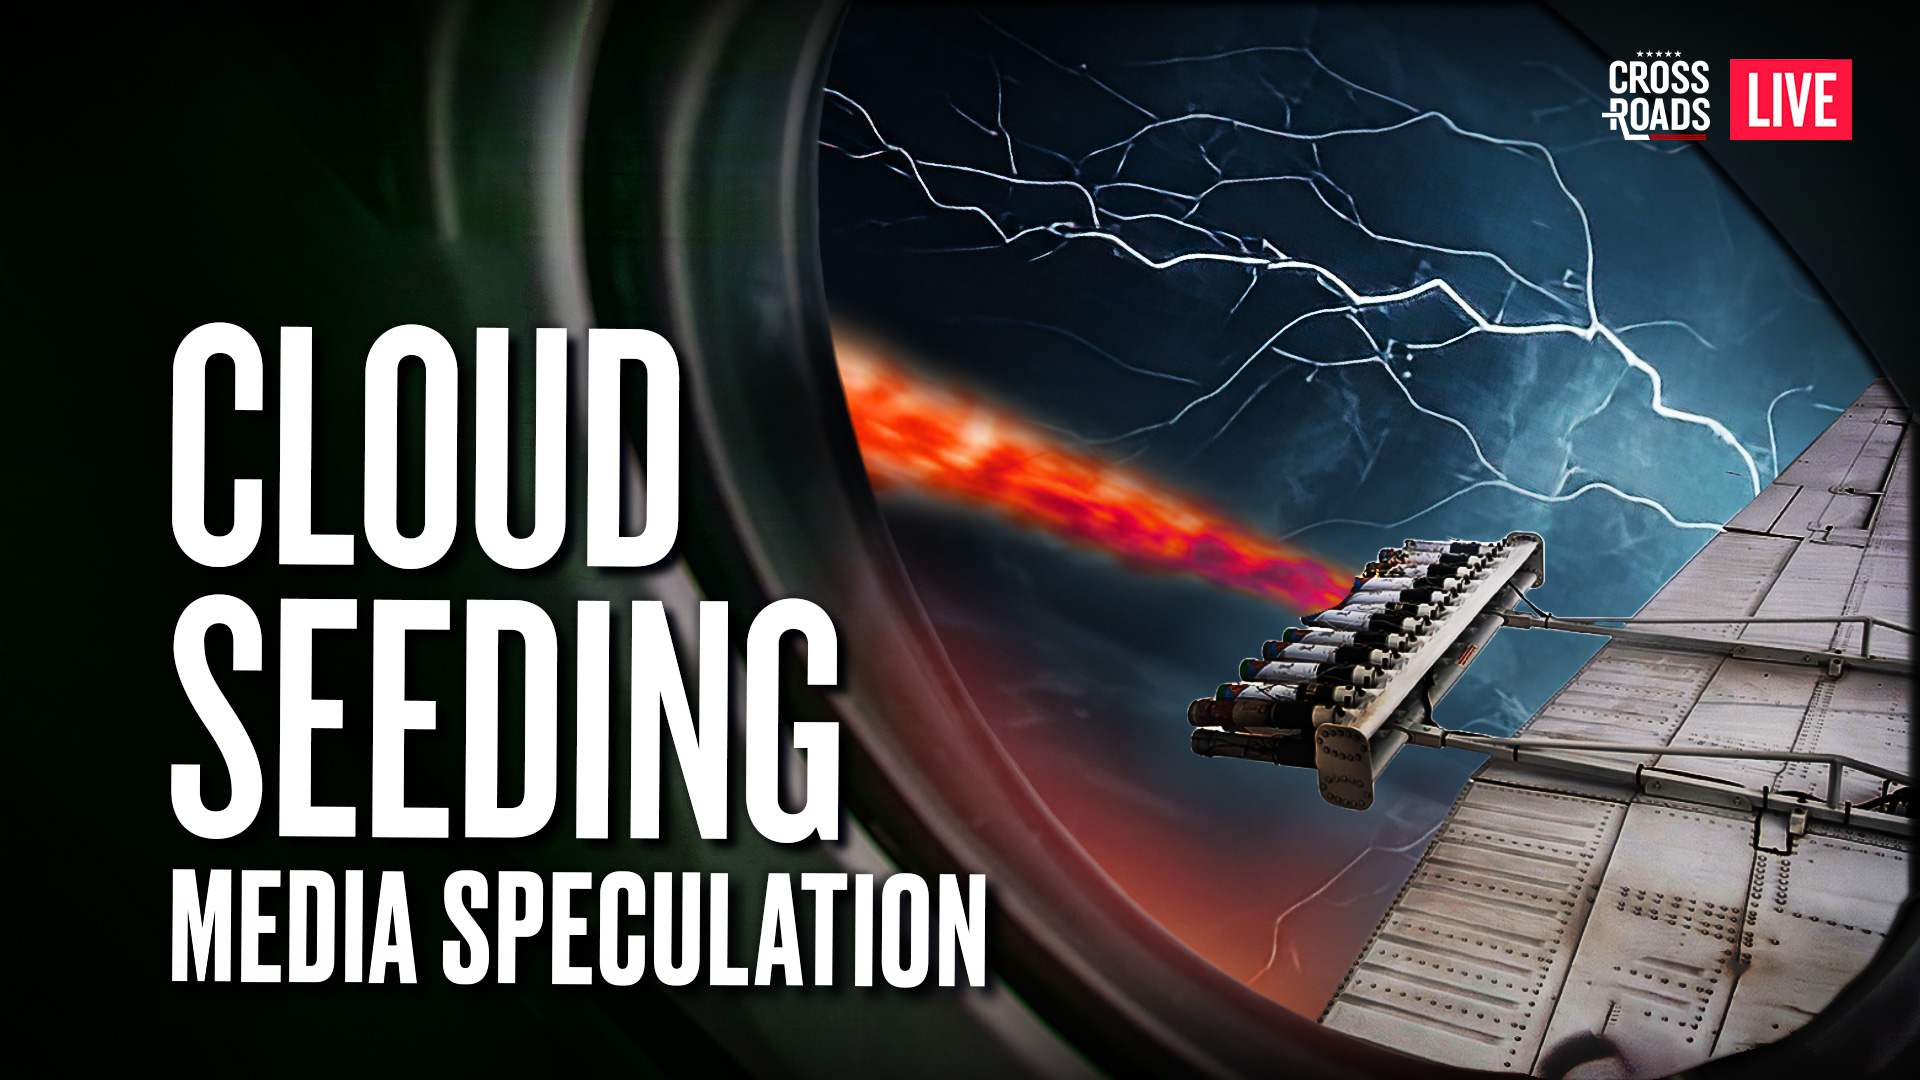 Media Raise Questions About Controversial Cloud Seeding After Middle East Floods | EpochTV